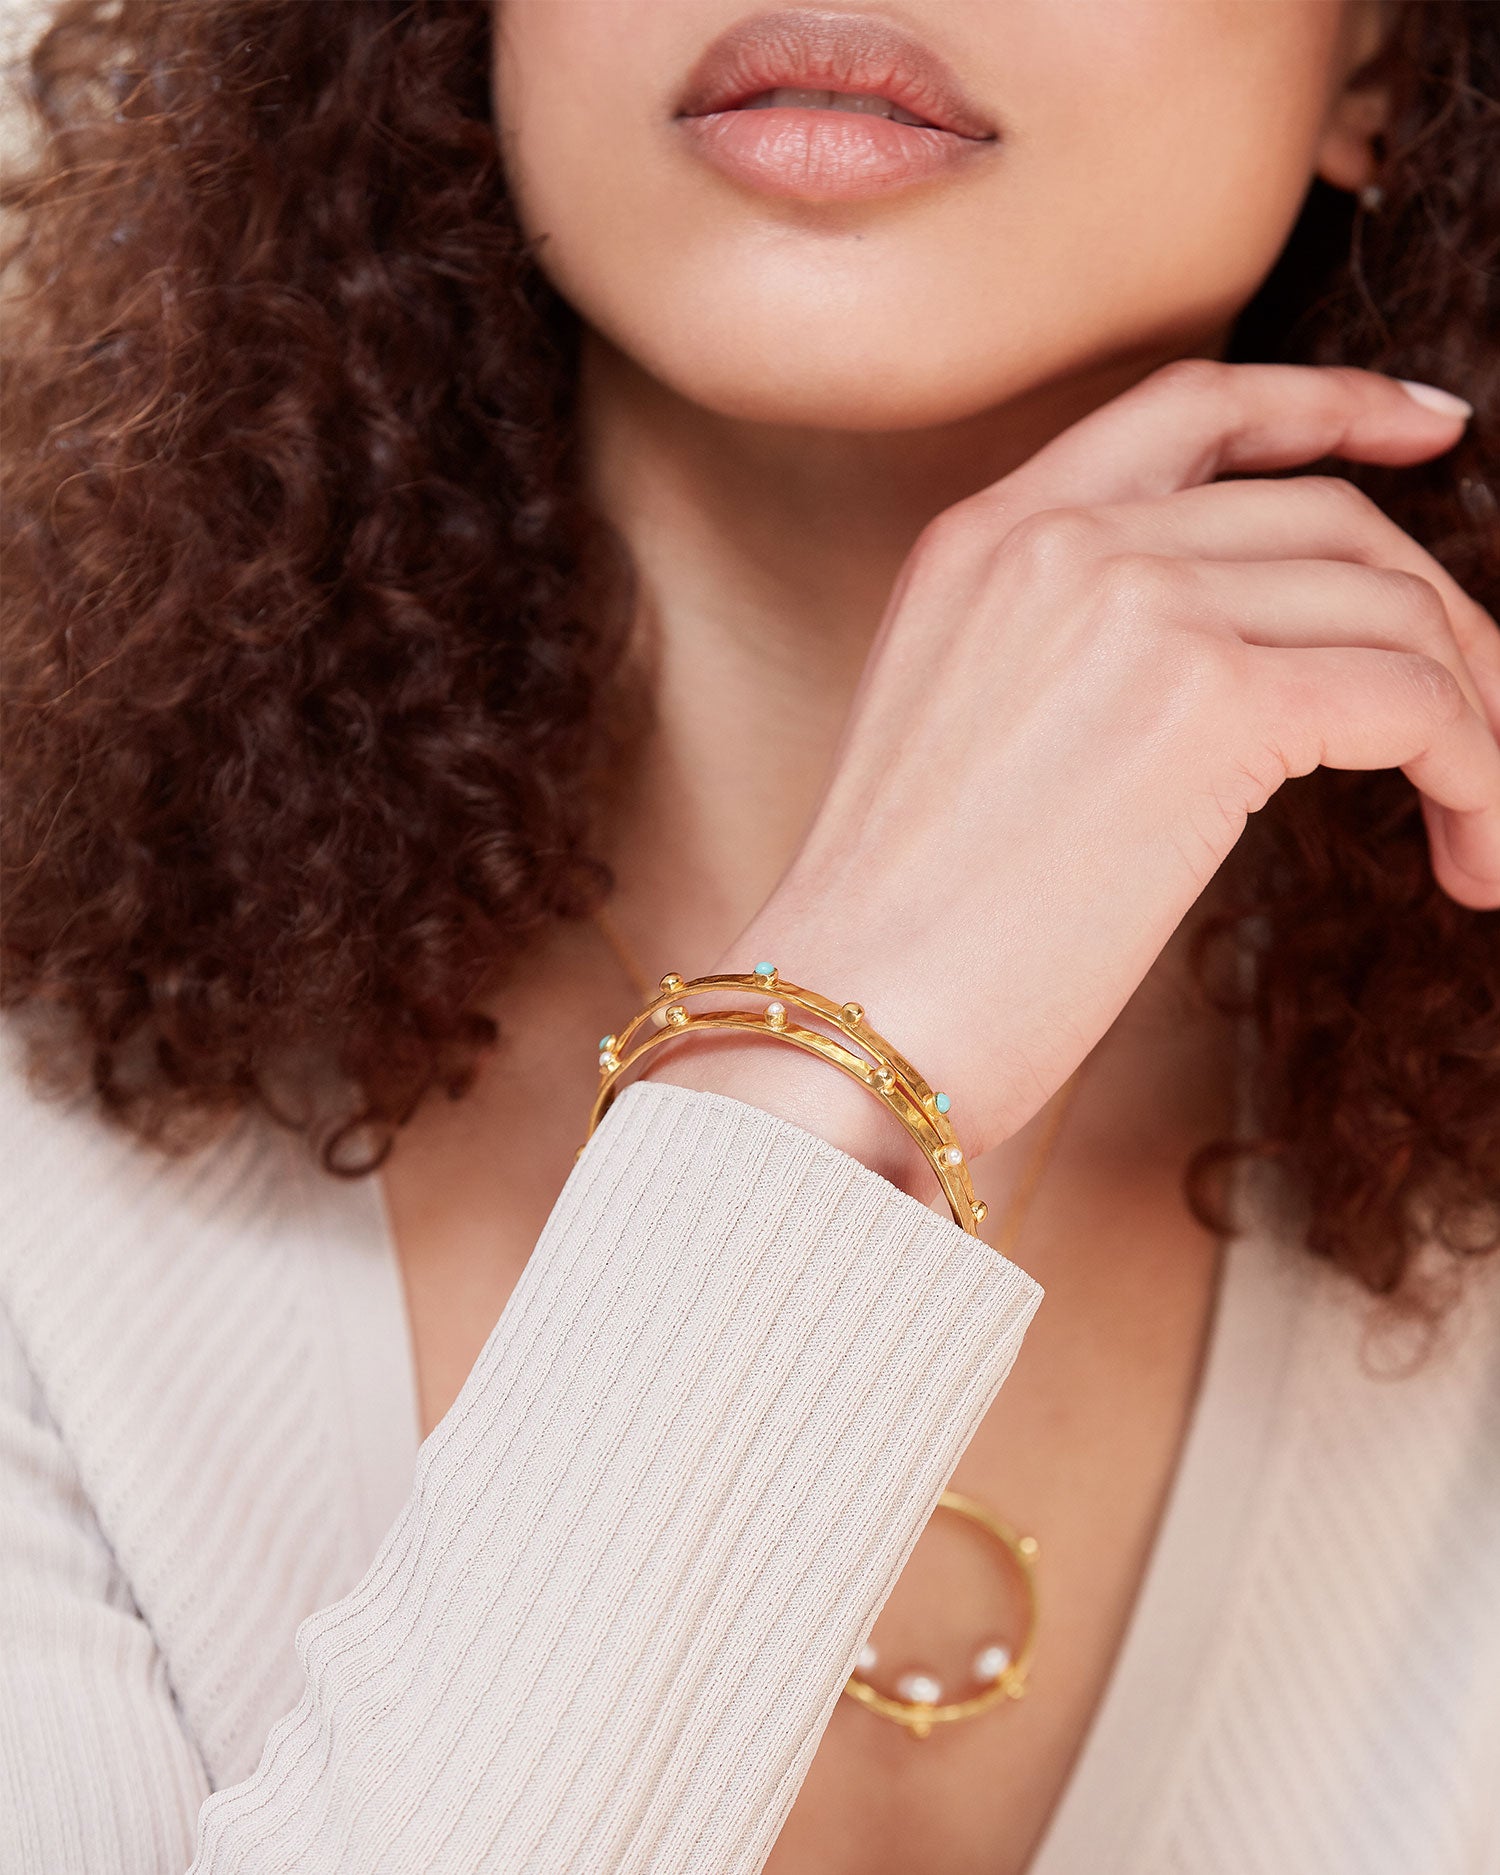 Tanrica Gold Bangle Bracelet with Pearl Beads | Sustainable Jewellery by Ottoman Hands